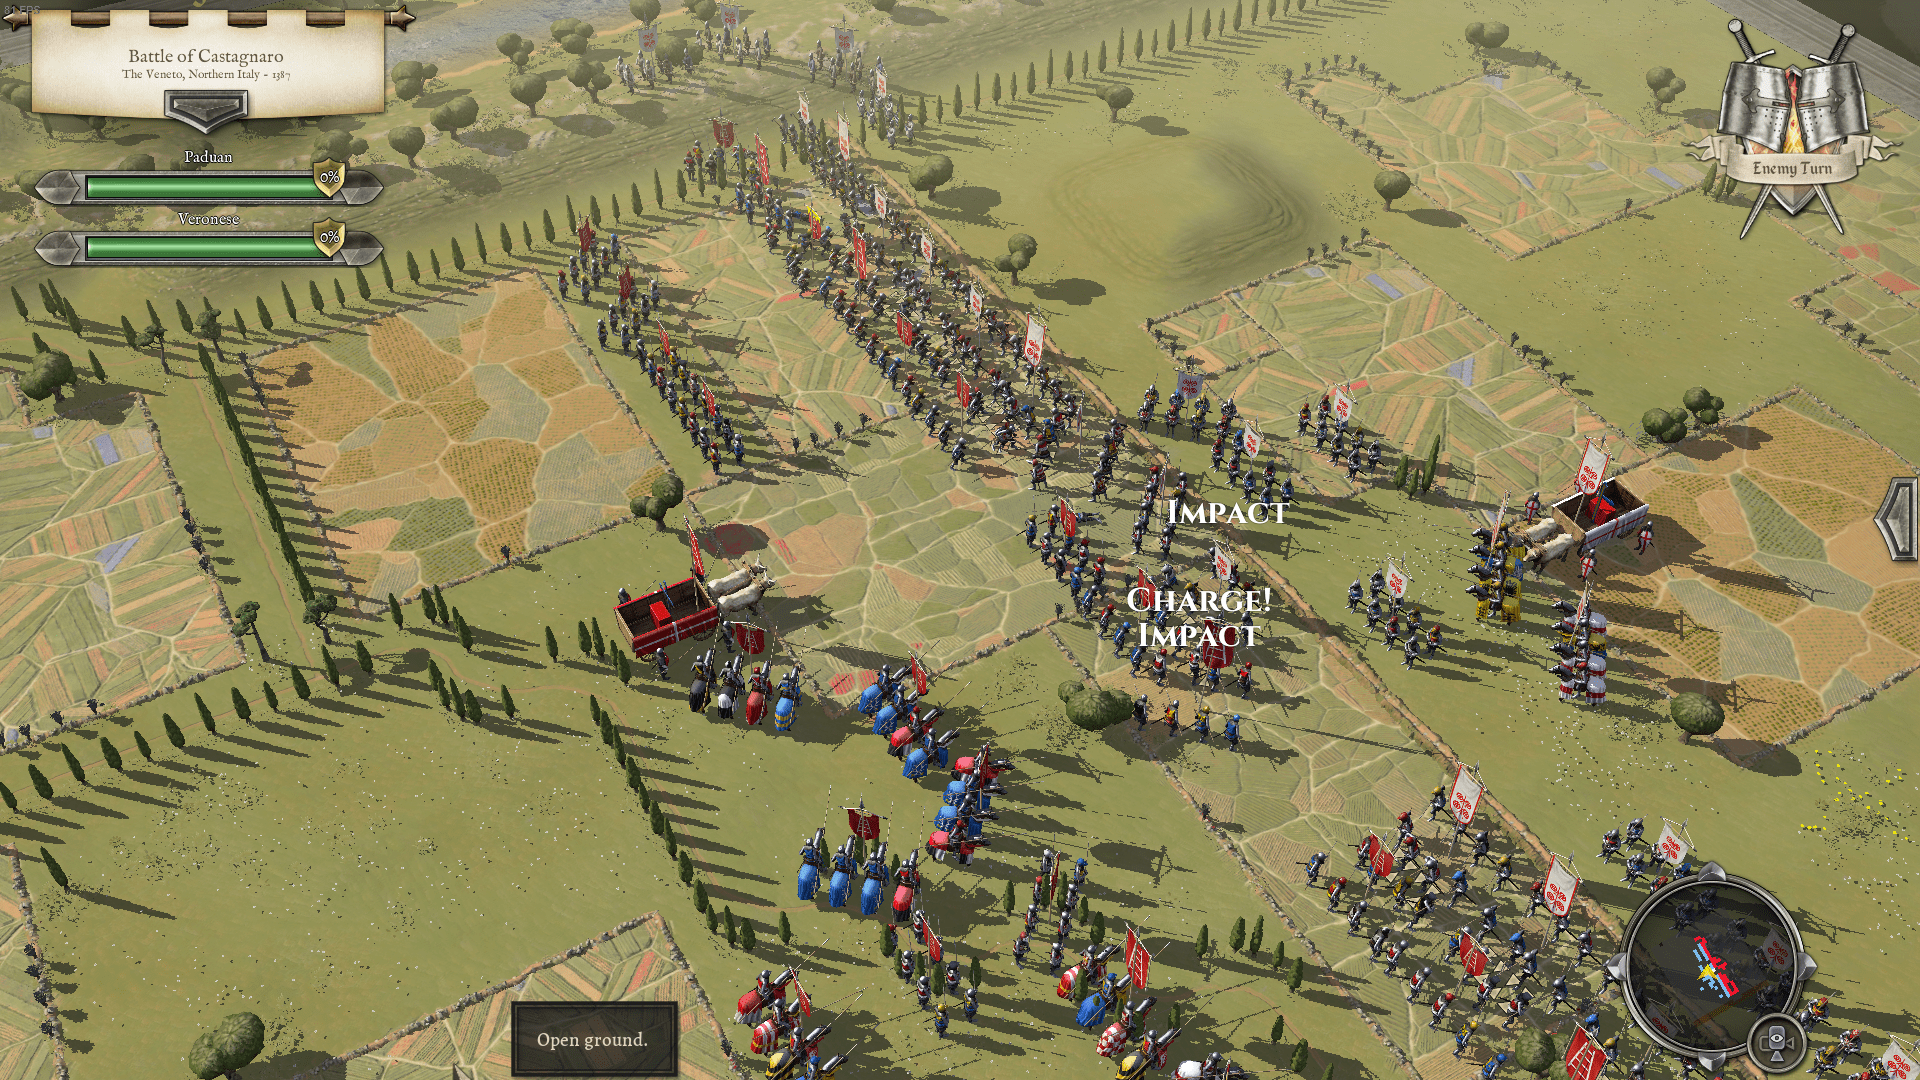 Field of Glory II: Medieval - Storm of Arrows | ROW (badc2d60-0160-4f7c-a536-a324532602e8)